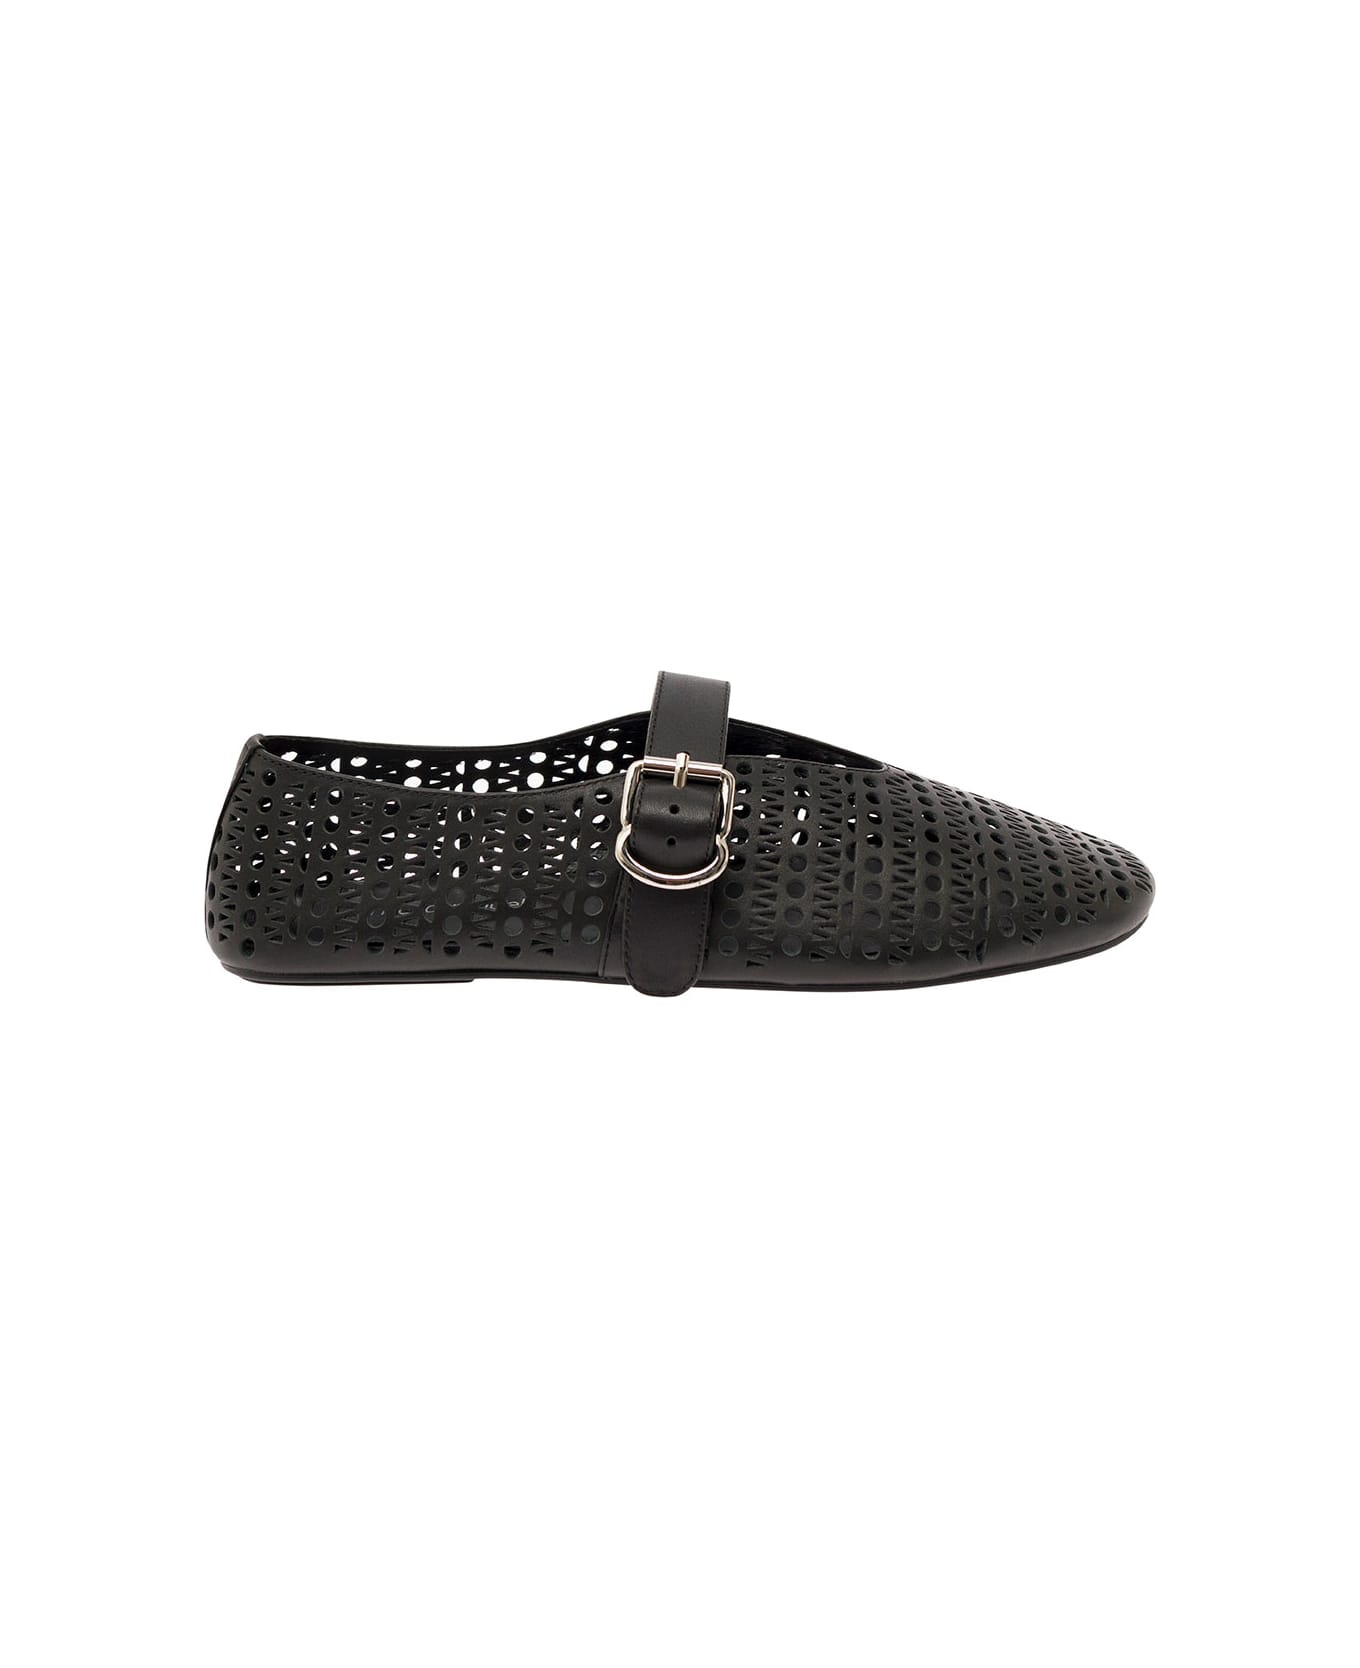 Jeffrey Campbell 'shelly' Black Ballet Flats With Maxi Buckle In Lace Effect Leather Woman - Black フラットシューズ